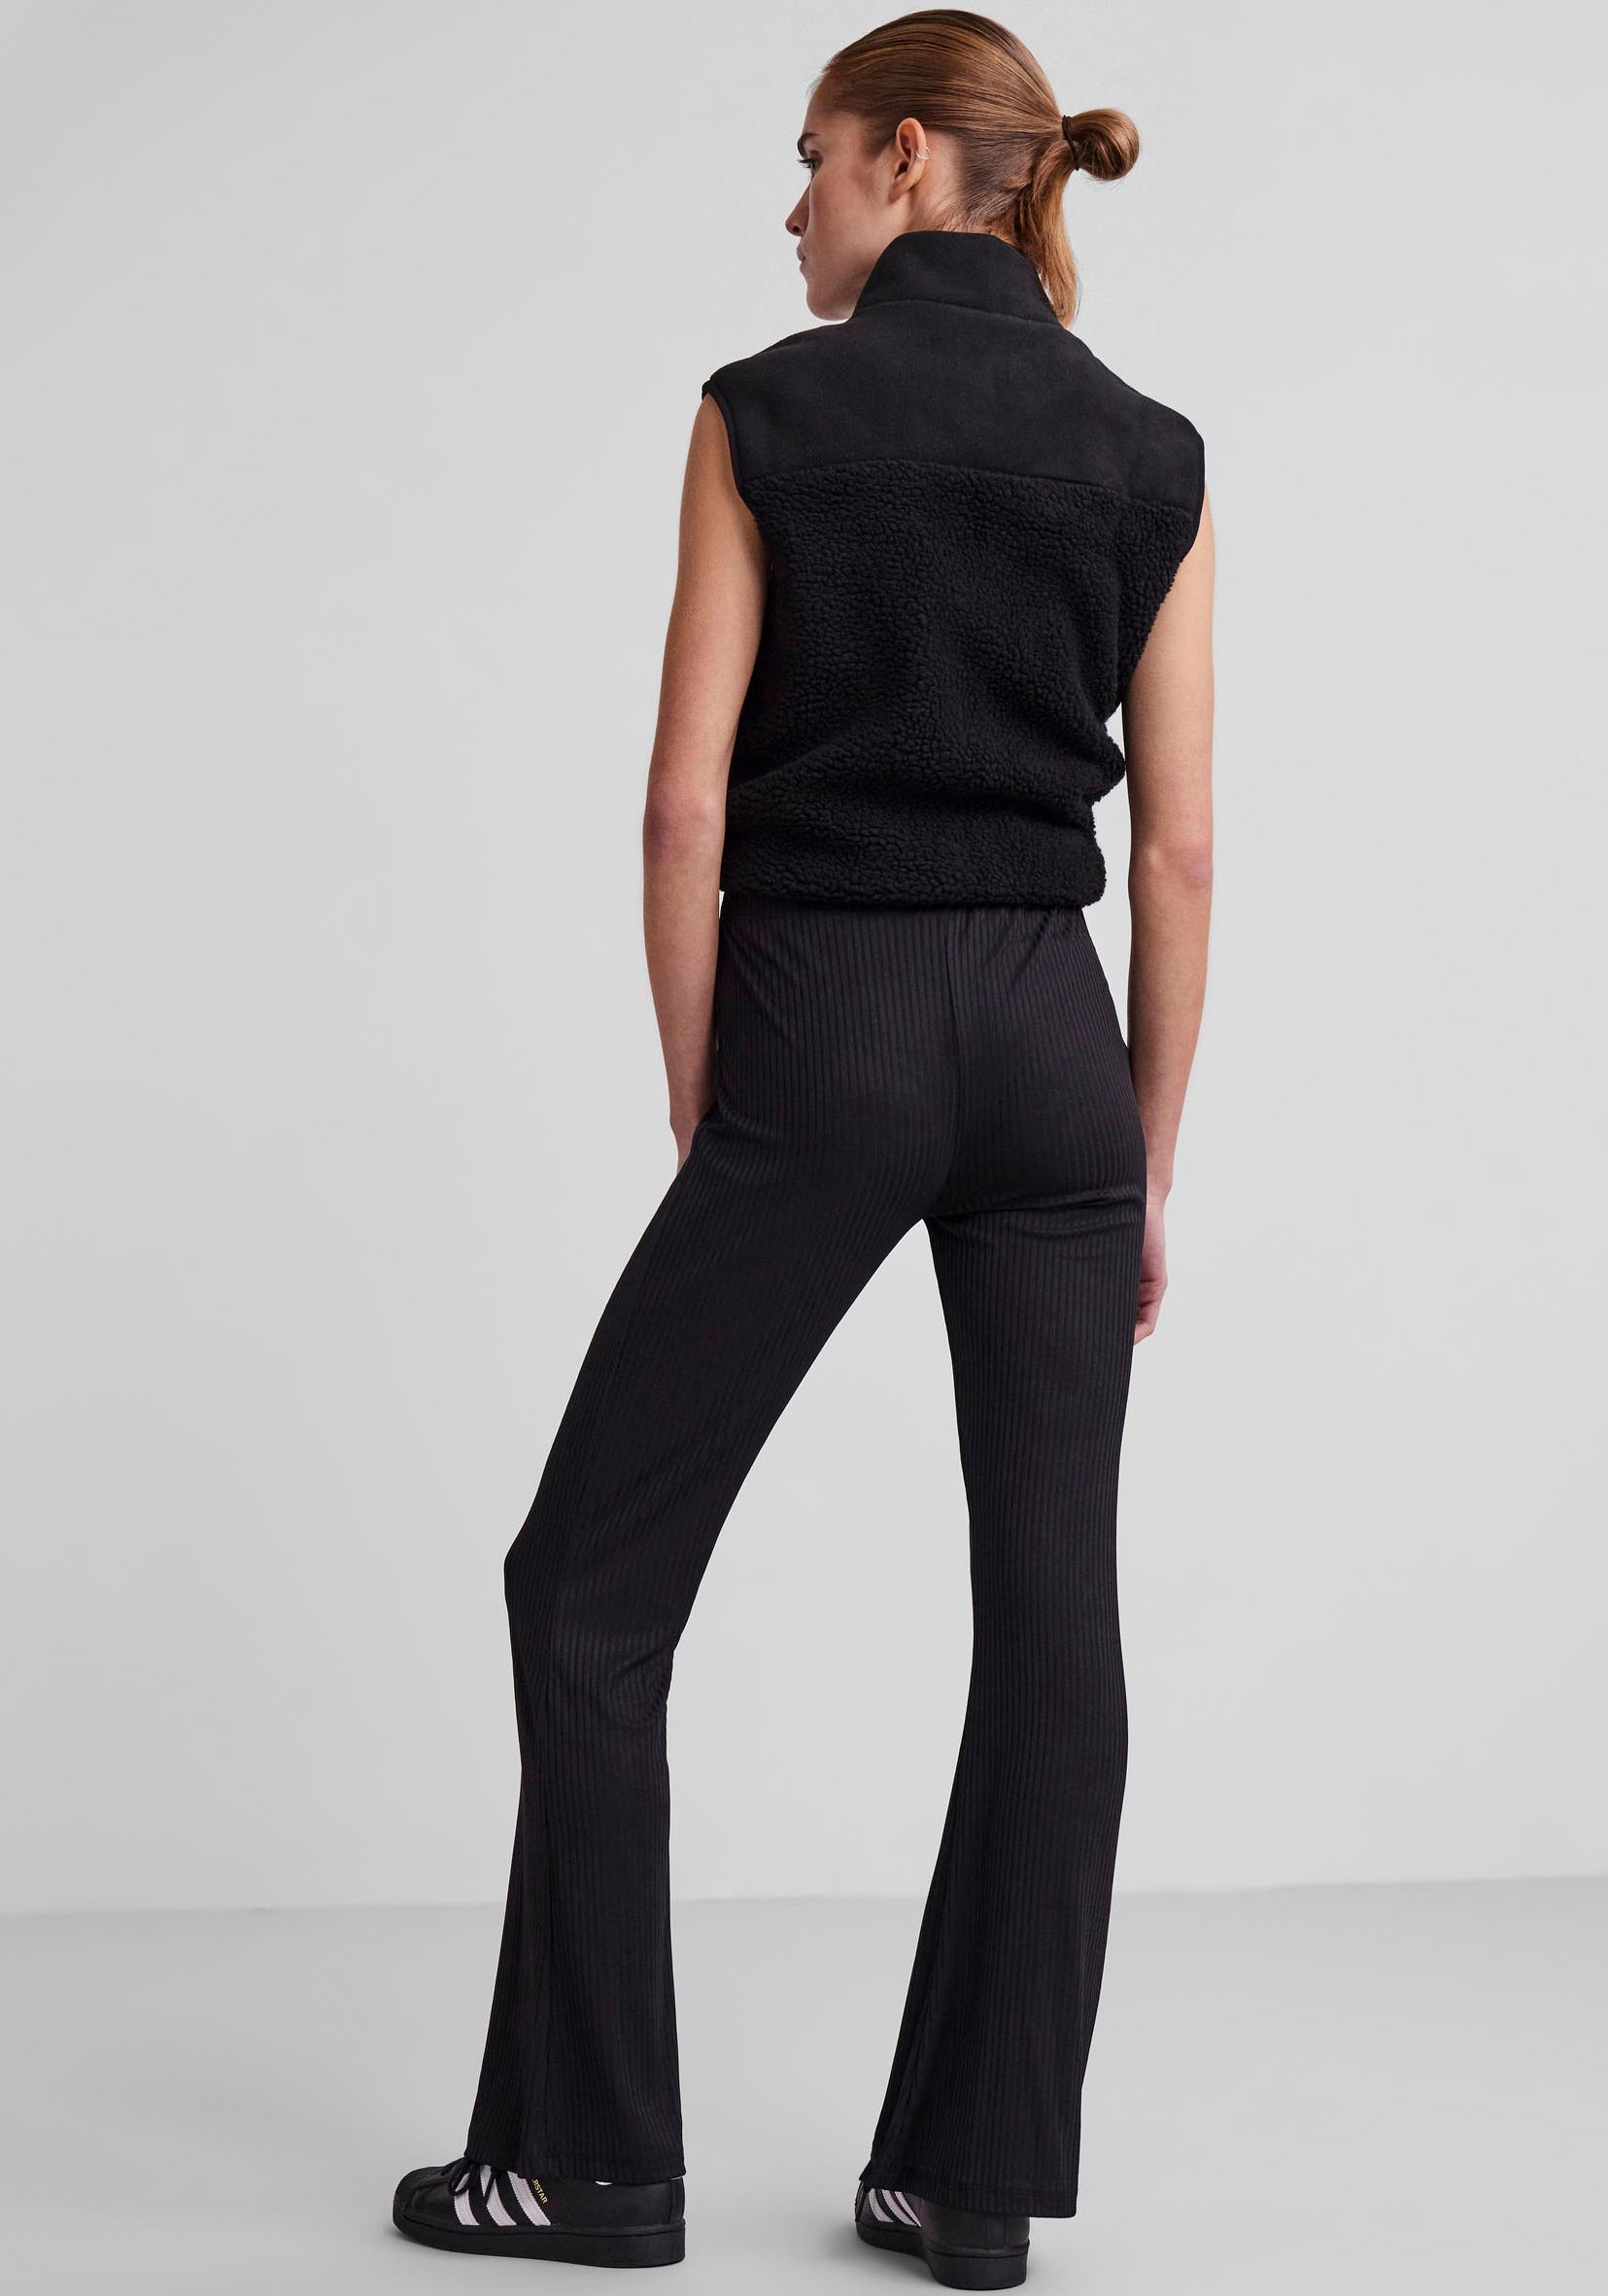 Flared ♕ MW pieces bei Bootcuthose NOOS«, FLARED Style PANT »PCTOPPY